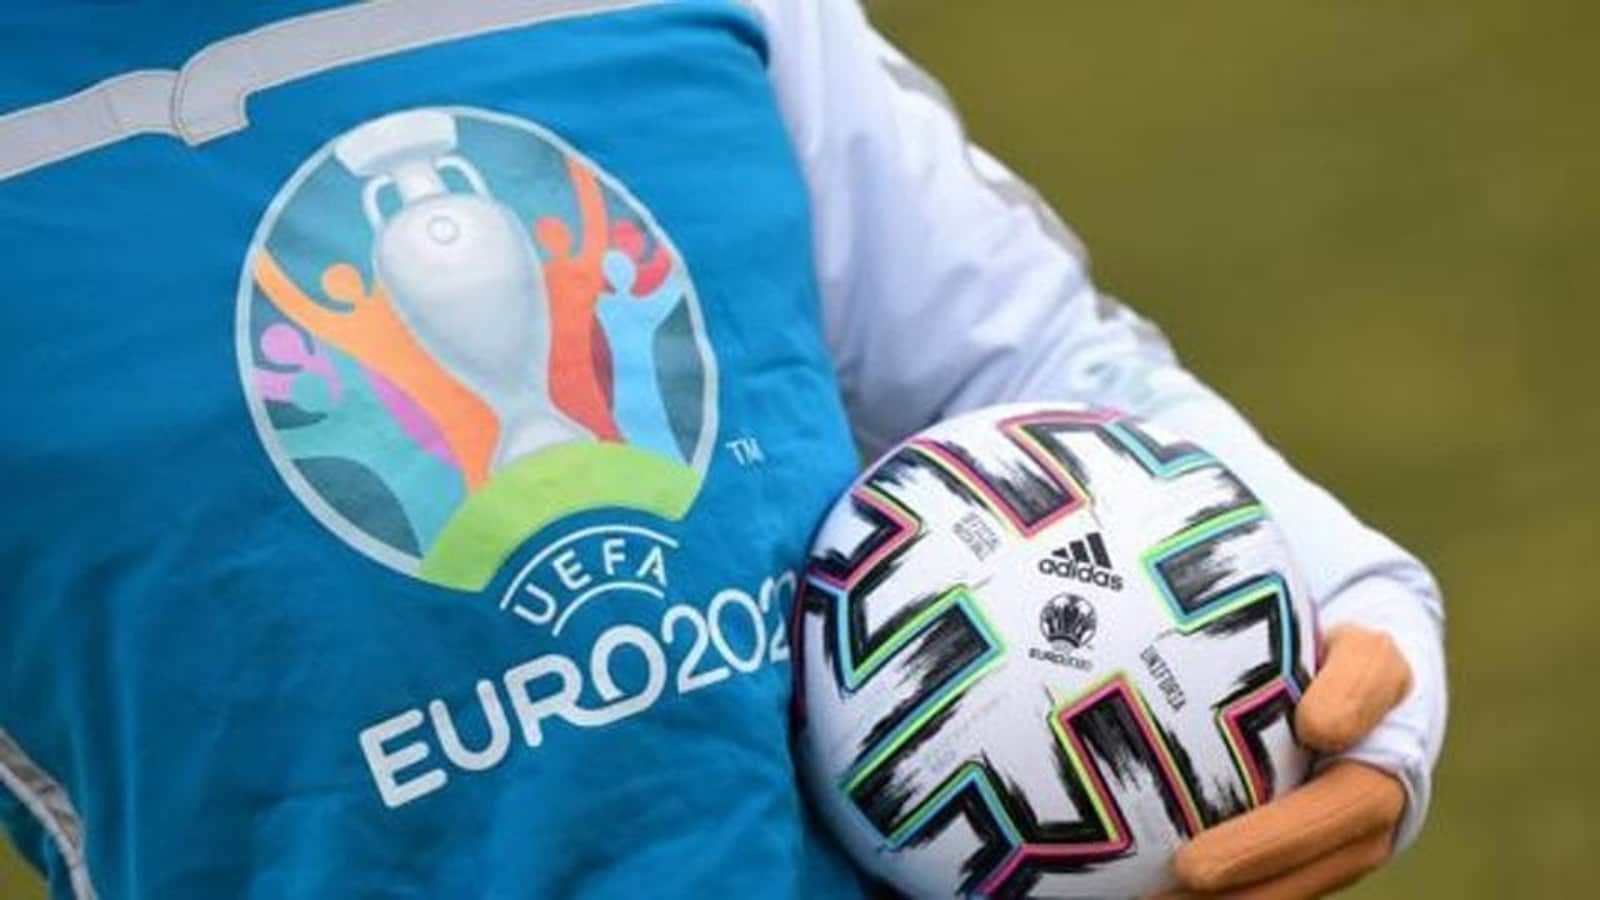 UEFA Euro 2020: A look at the prime contenders for the trophy